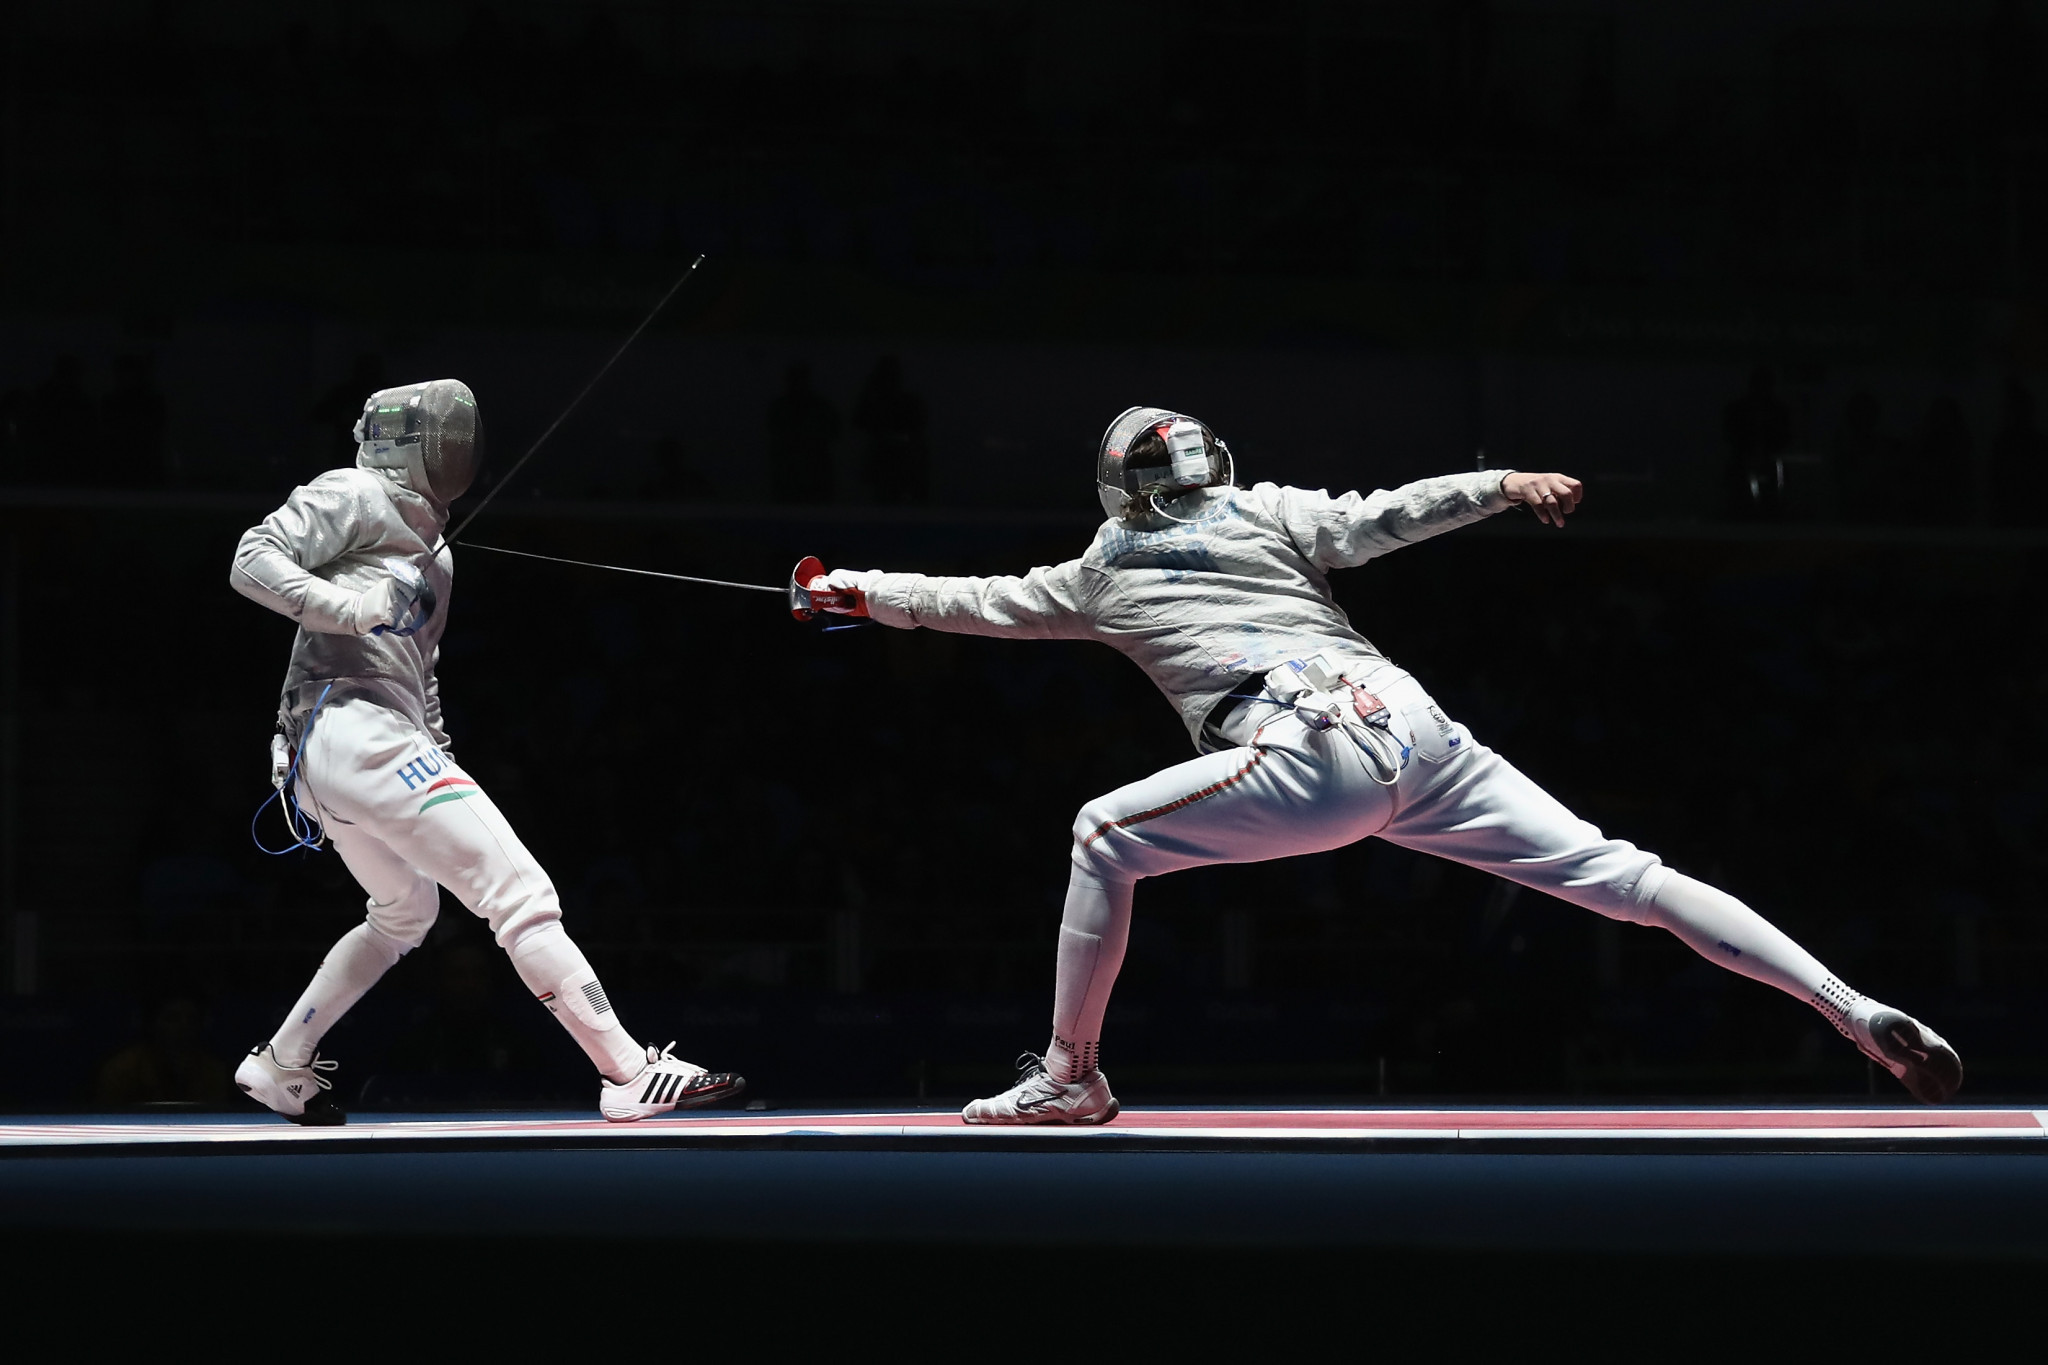 The Belarusian Fencing Federation has claimed the exclusion of some of its athletes by the FIE violates 